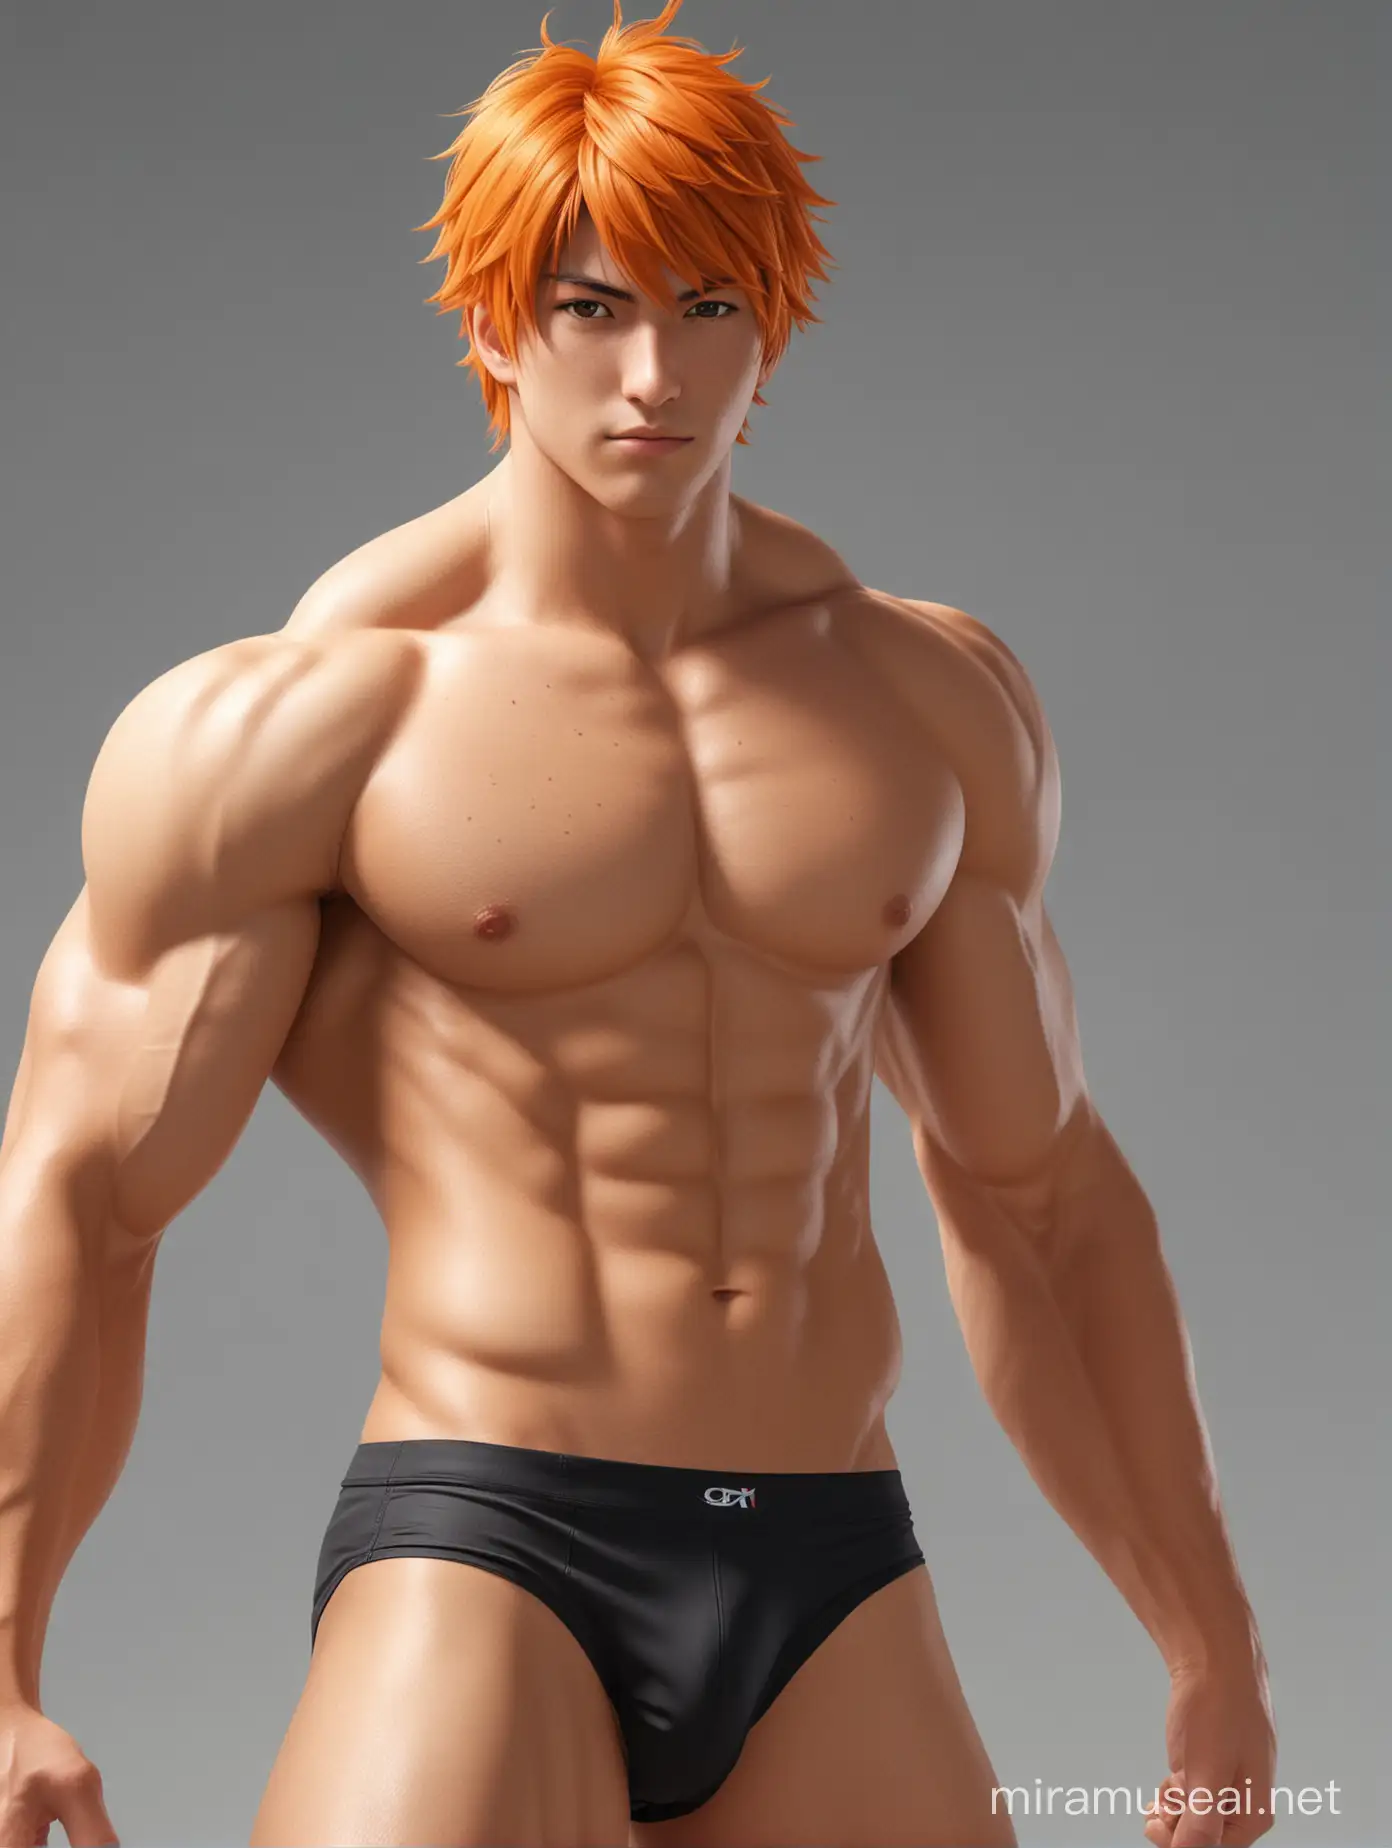  Full full body photorealistic ultra realism high definition aesthetic stabilized diffusion picture of handsome hunky fractal clean shaven hayate ichinosi as orange haired Ichigo..standing firmly face front camera focus.He is Volleyball player.